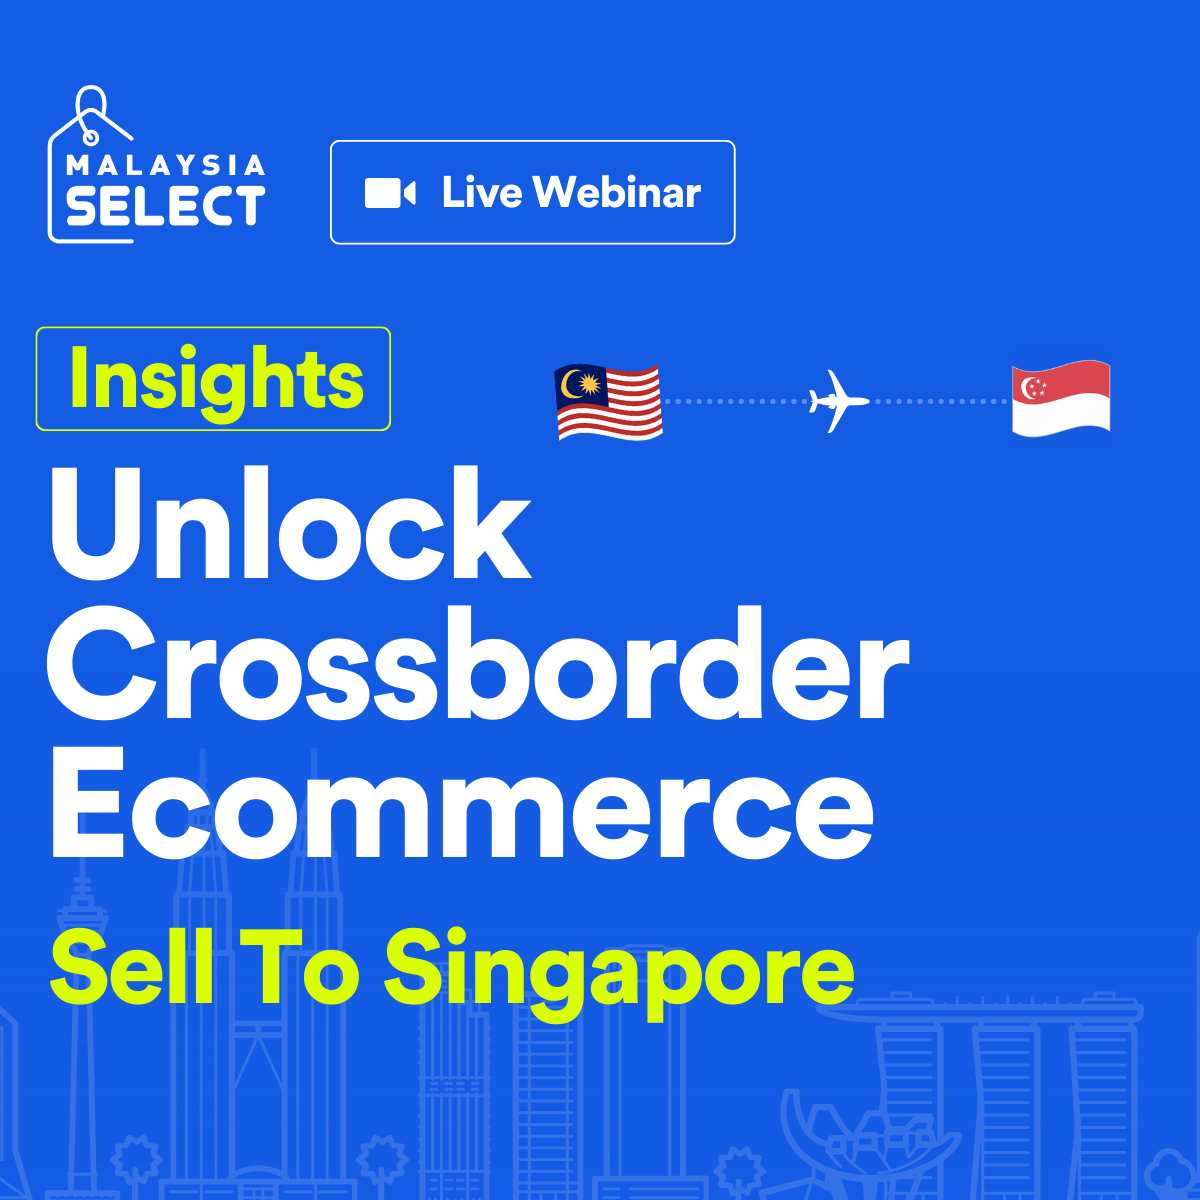  Unlock Crossborder Ecommerce: Insights on Selling To Singapore  | EasyStore